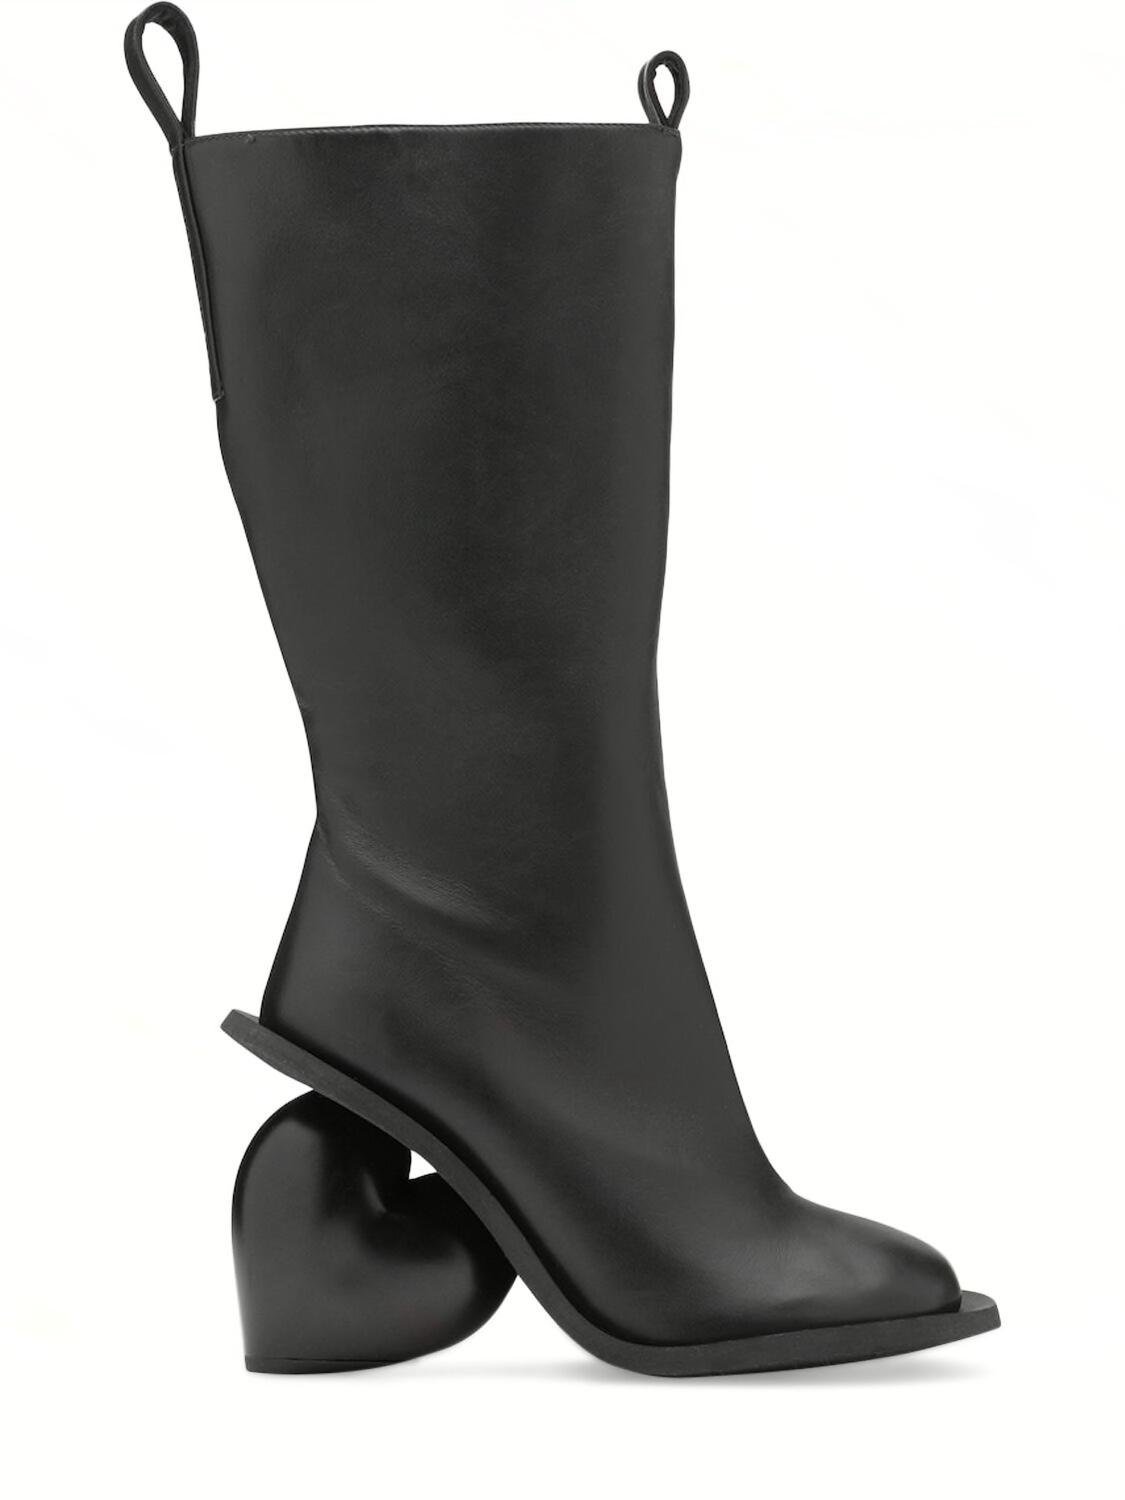 90mm Love Tall Boots by YUME YUME